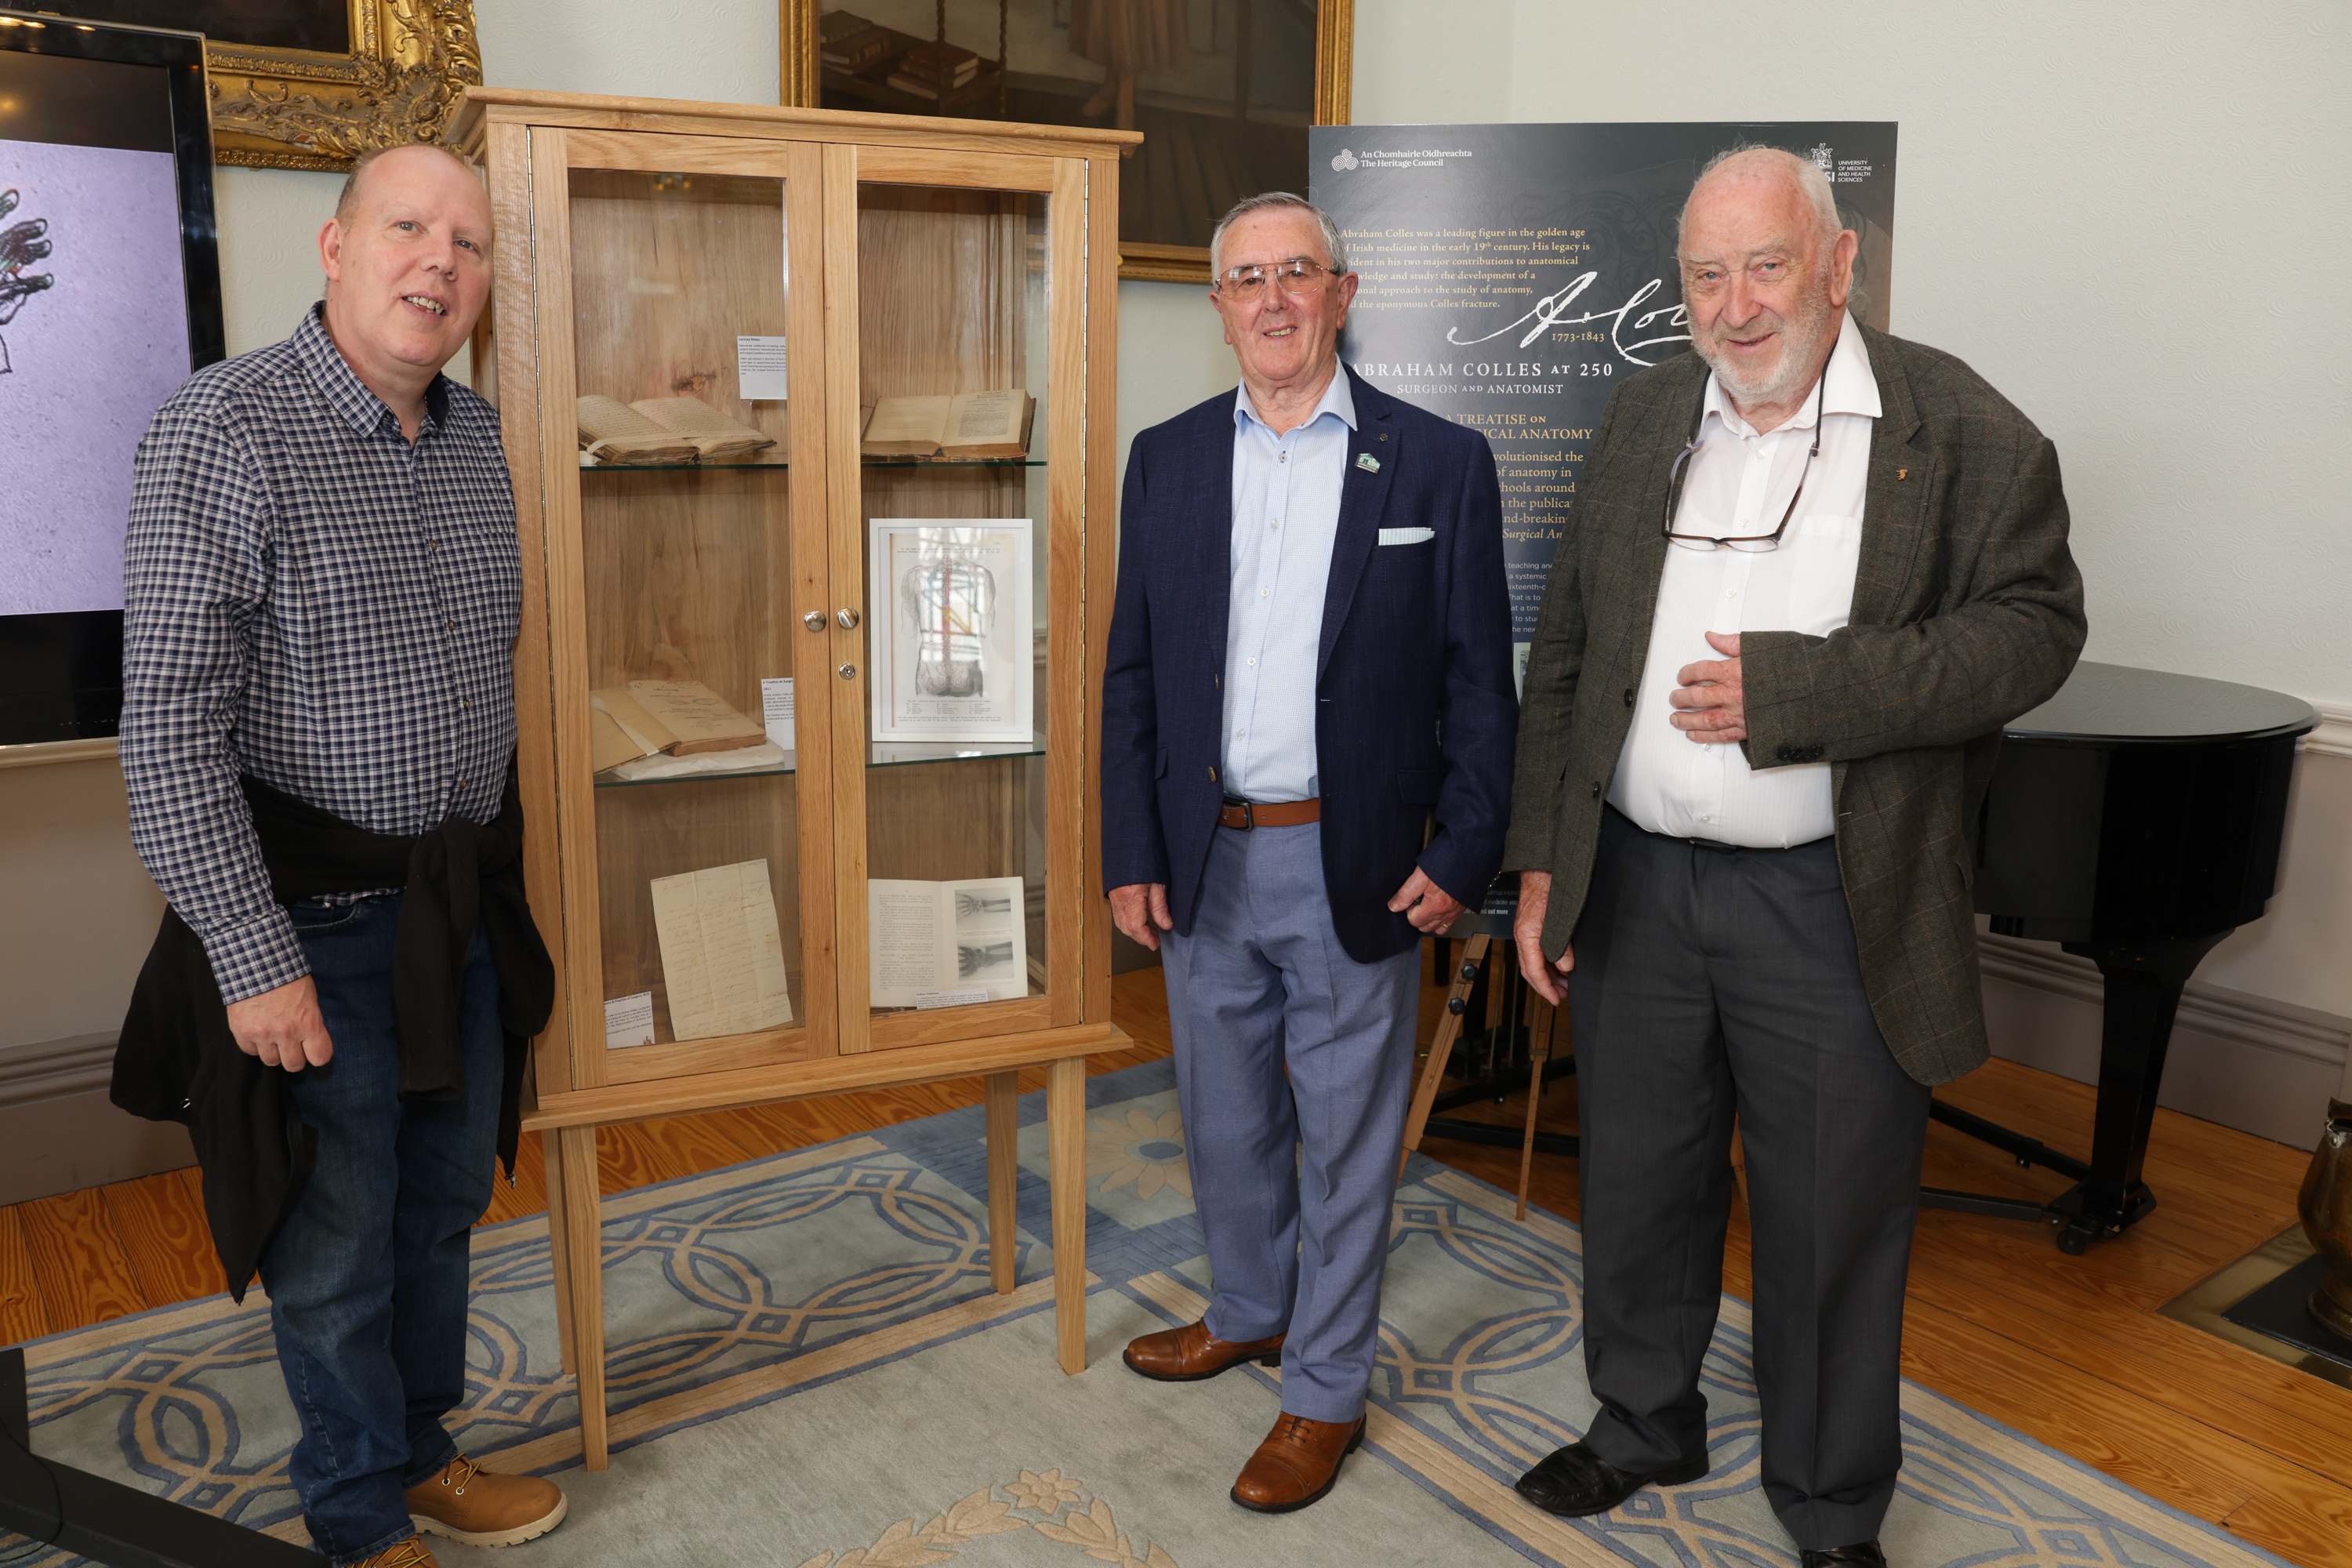 Members of Clondalkin Men's Shed crafted bespoke display cabinets for RCSI's Colles at 250 celebration.